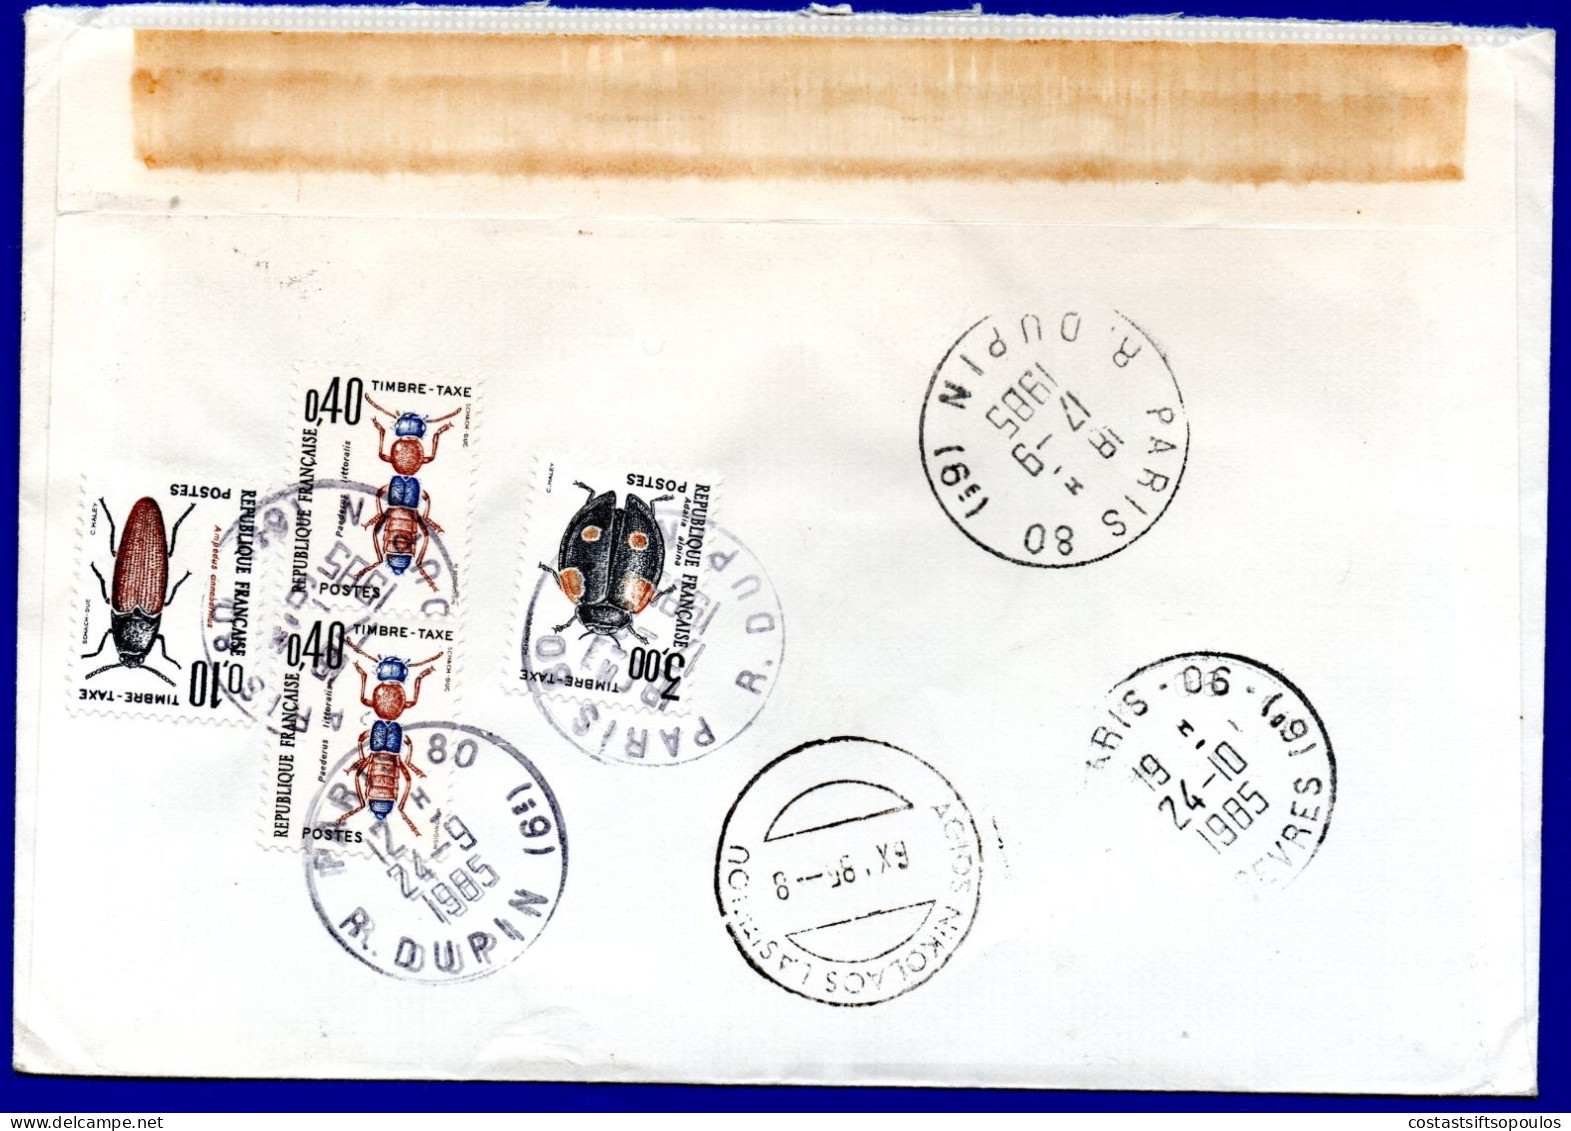 3503. RETURNED FROM FRANCE LETTER TO AG. NICOLAOS, CRETE 7.80 ??? FR. POSTAGE DUE - Lettres & Documents